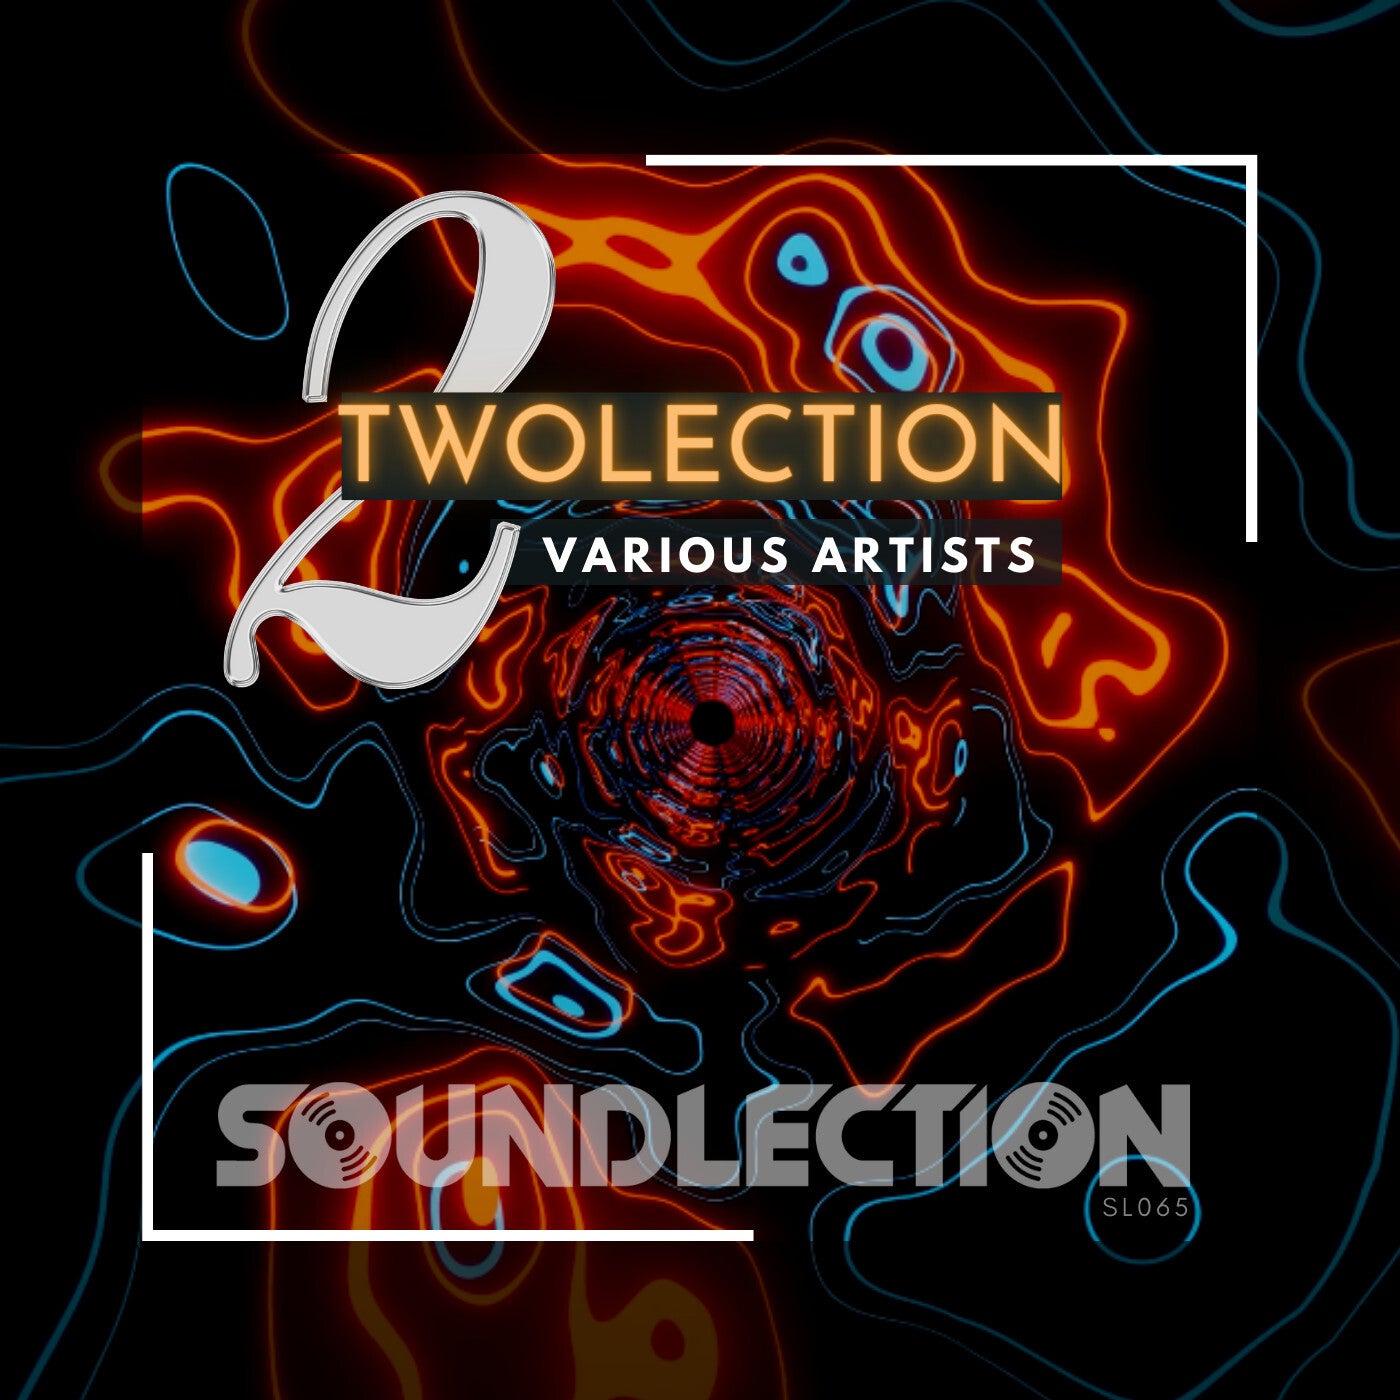 TwoLection